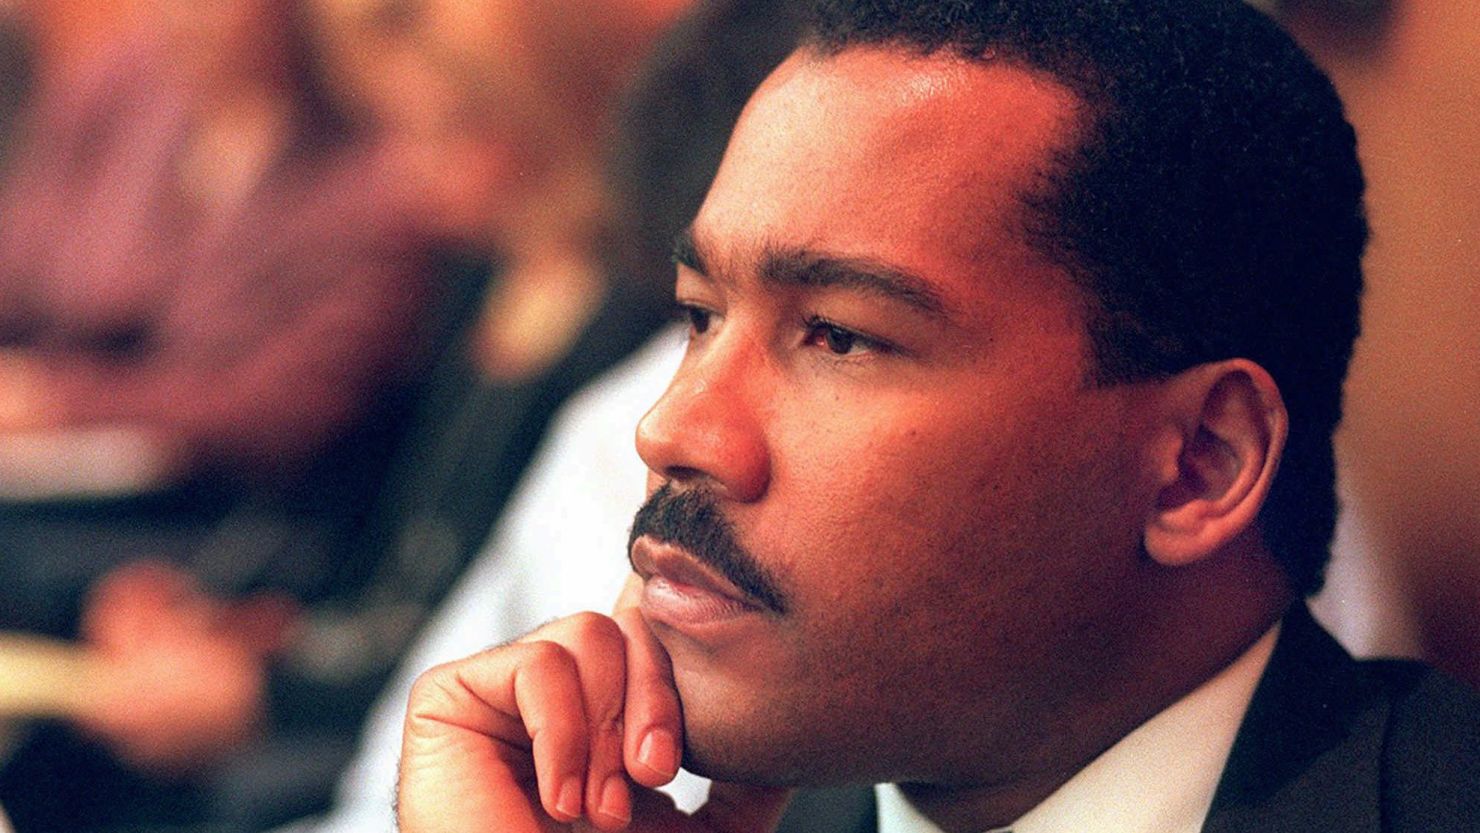 Dexter King, son of the late civil rights leader Martin Luther King Jr., listens to arguments in the State Court of Criminal Appeals in Jackson, Tenn., Friday, Aug. 29, 1997, to determine whether two Memphis judges have overstepped their authority surrounding the investigation of the King assassination. (AP photo/The Jackson Sun, Helen Comer, Pool)